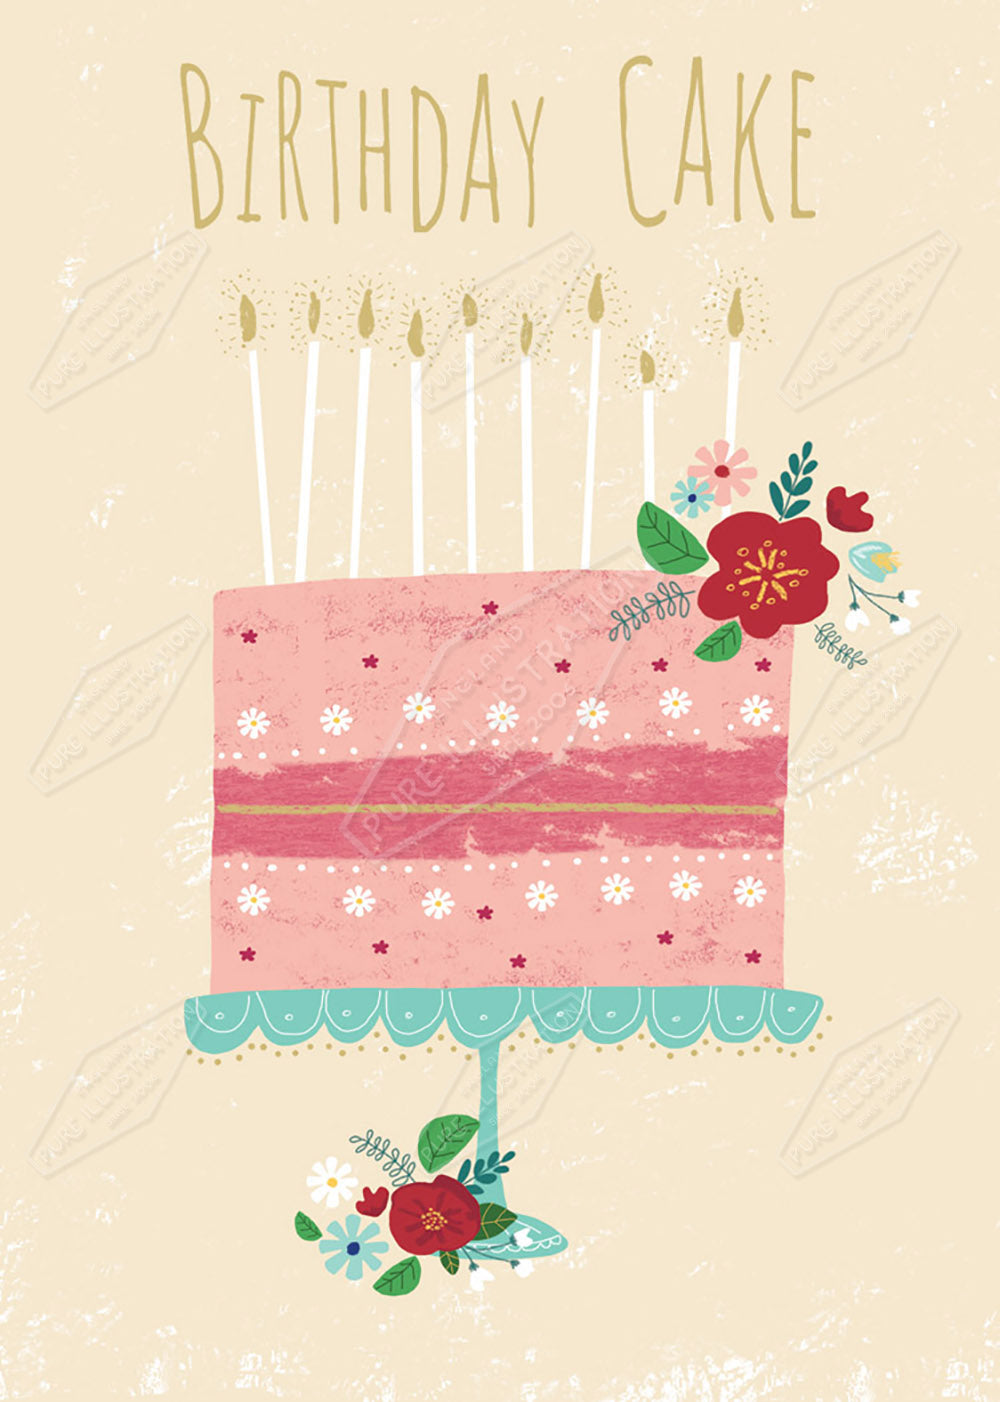 Birthday Cake Illustration by Cory Reid for Pure Art Licensing Agency & Surface Design Studio